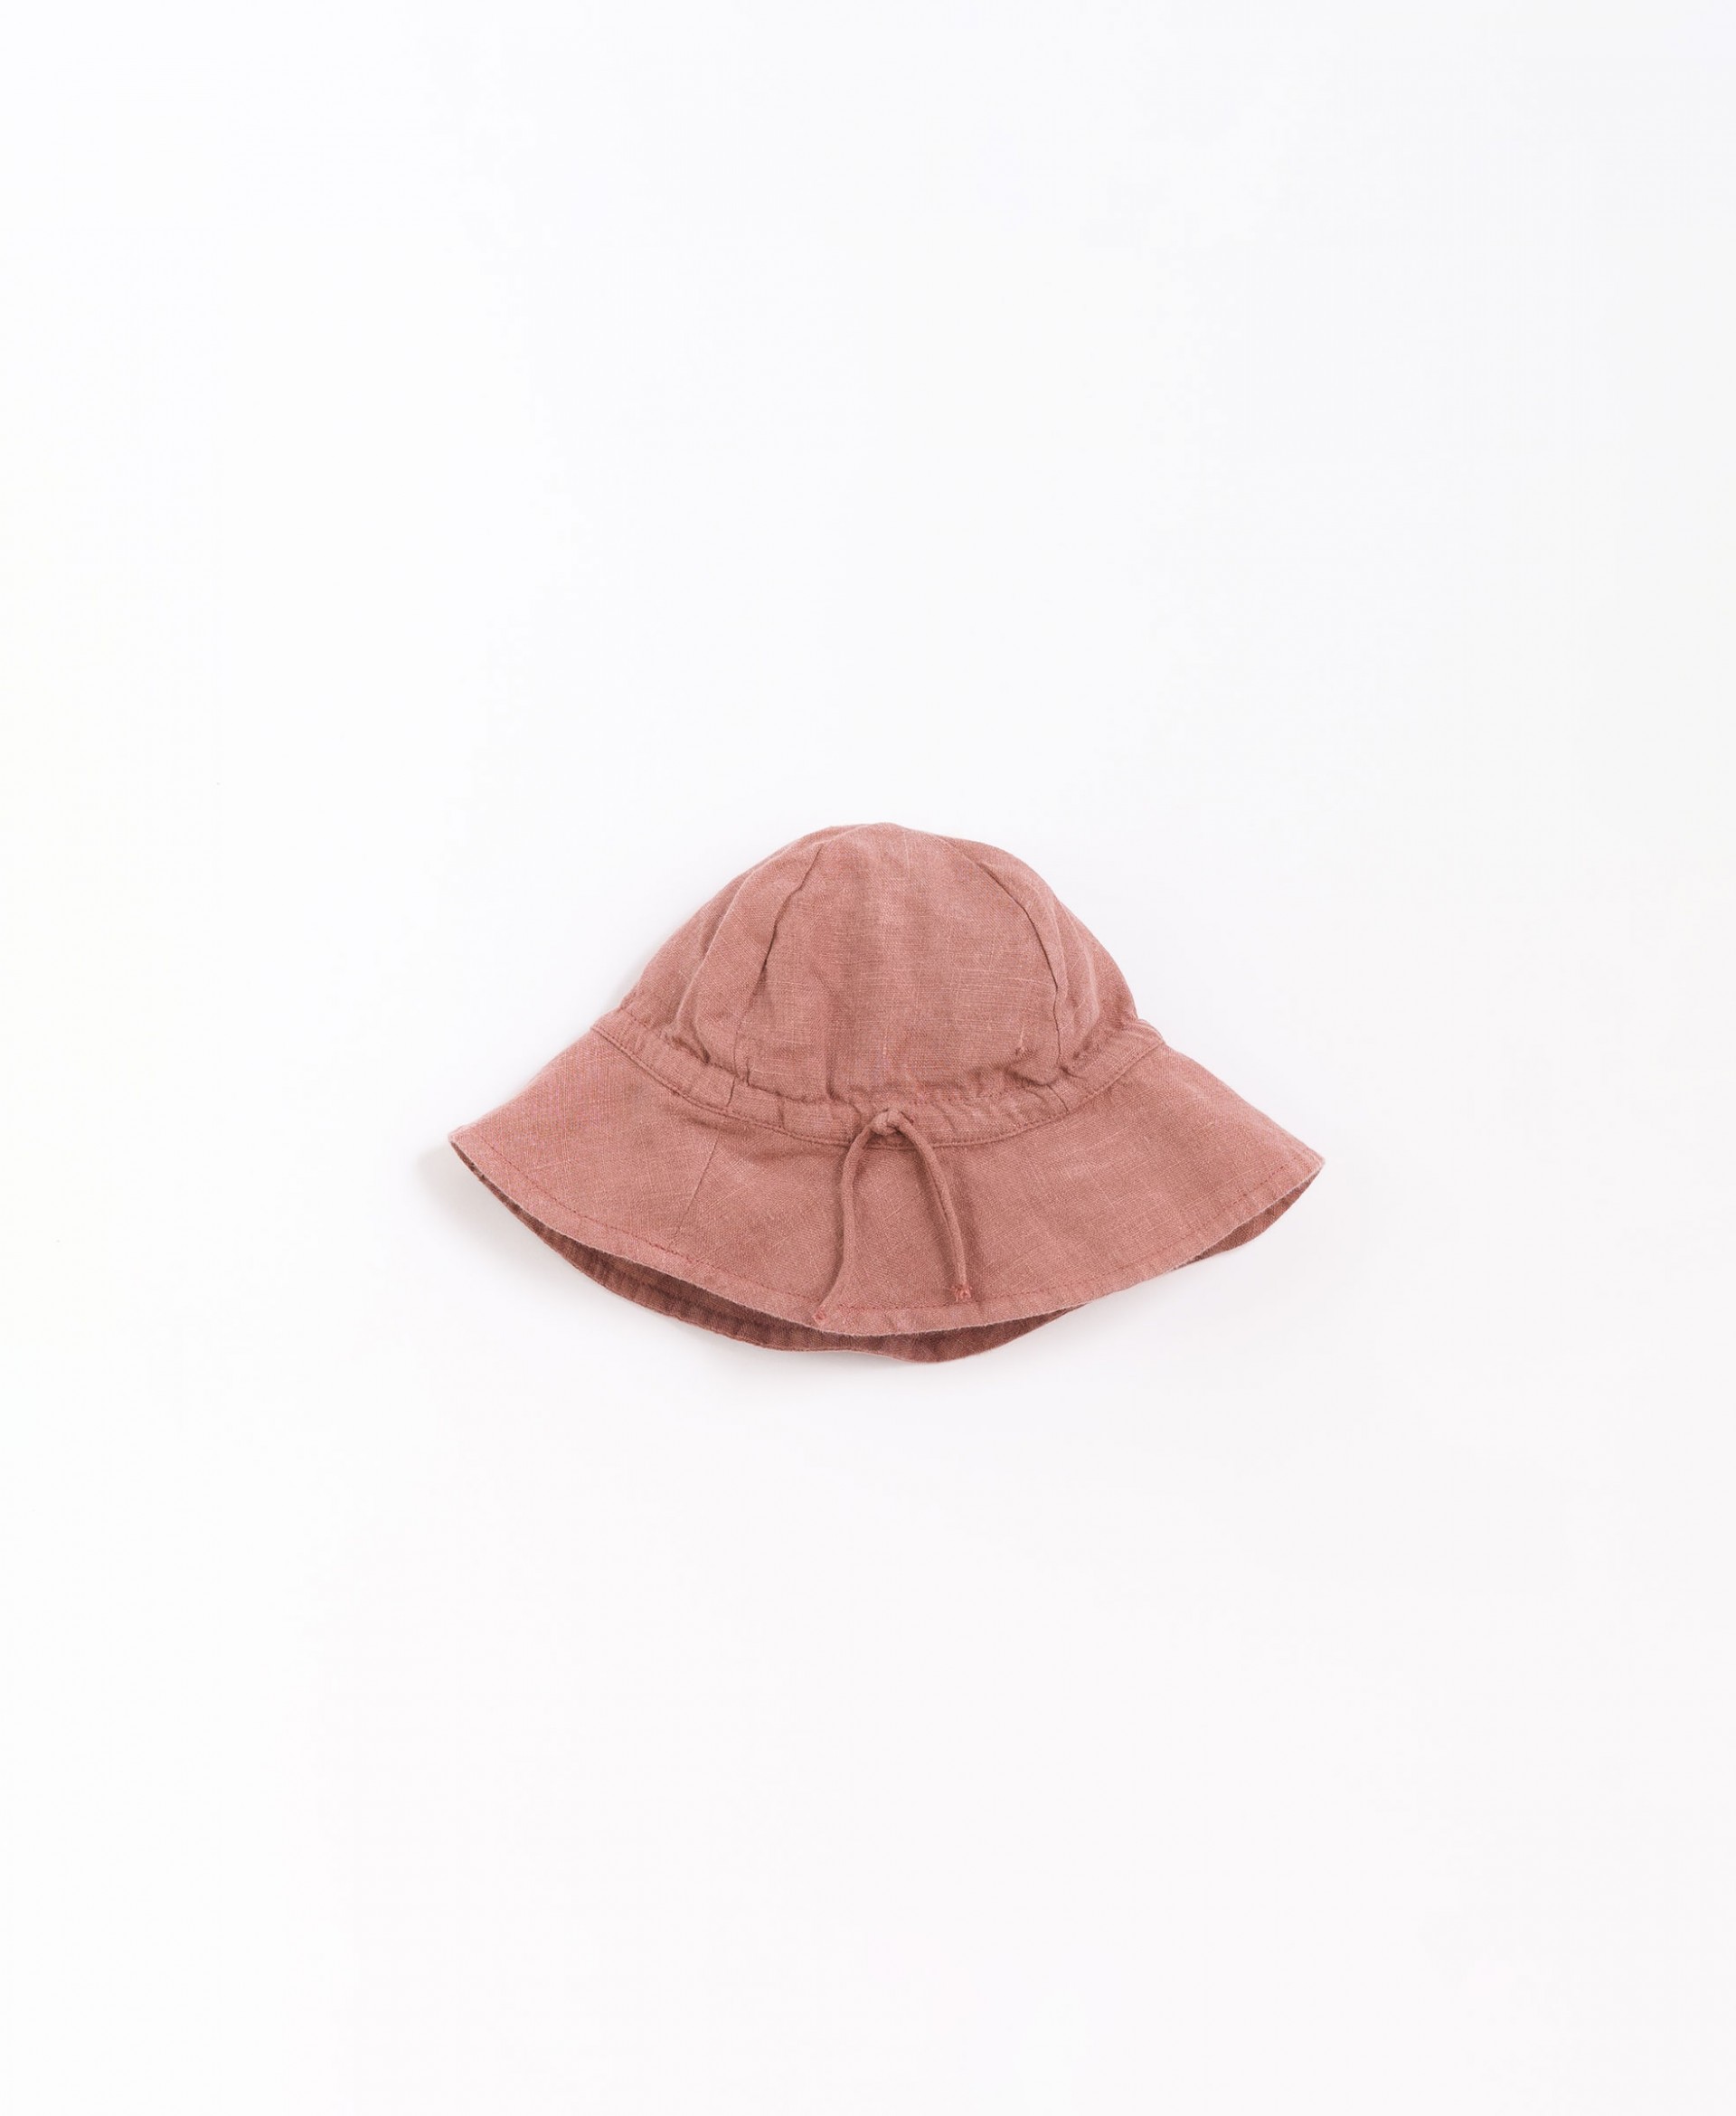 Linen hat with brim | Basketry